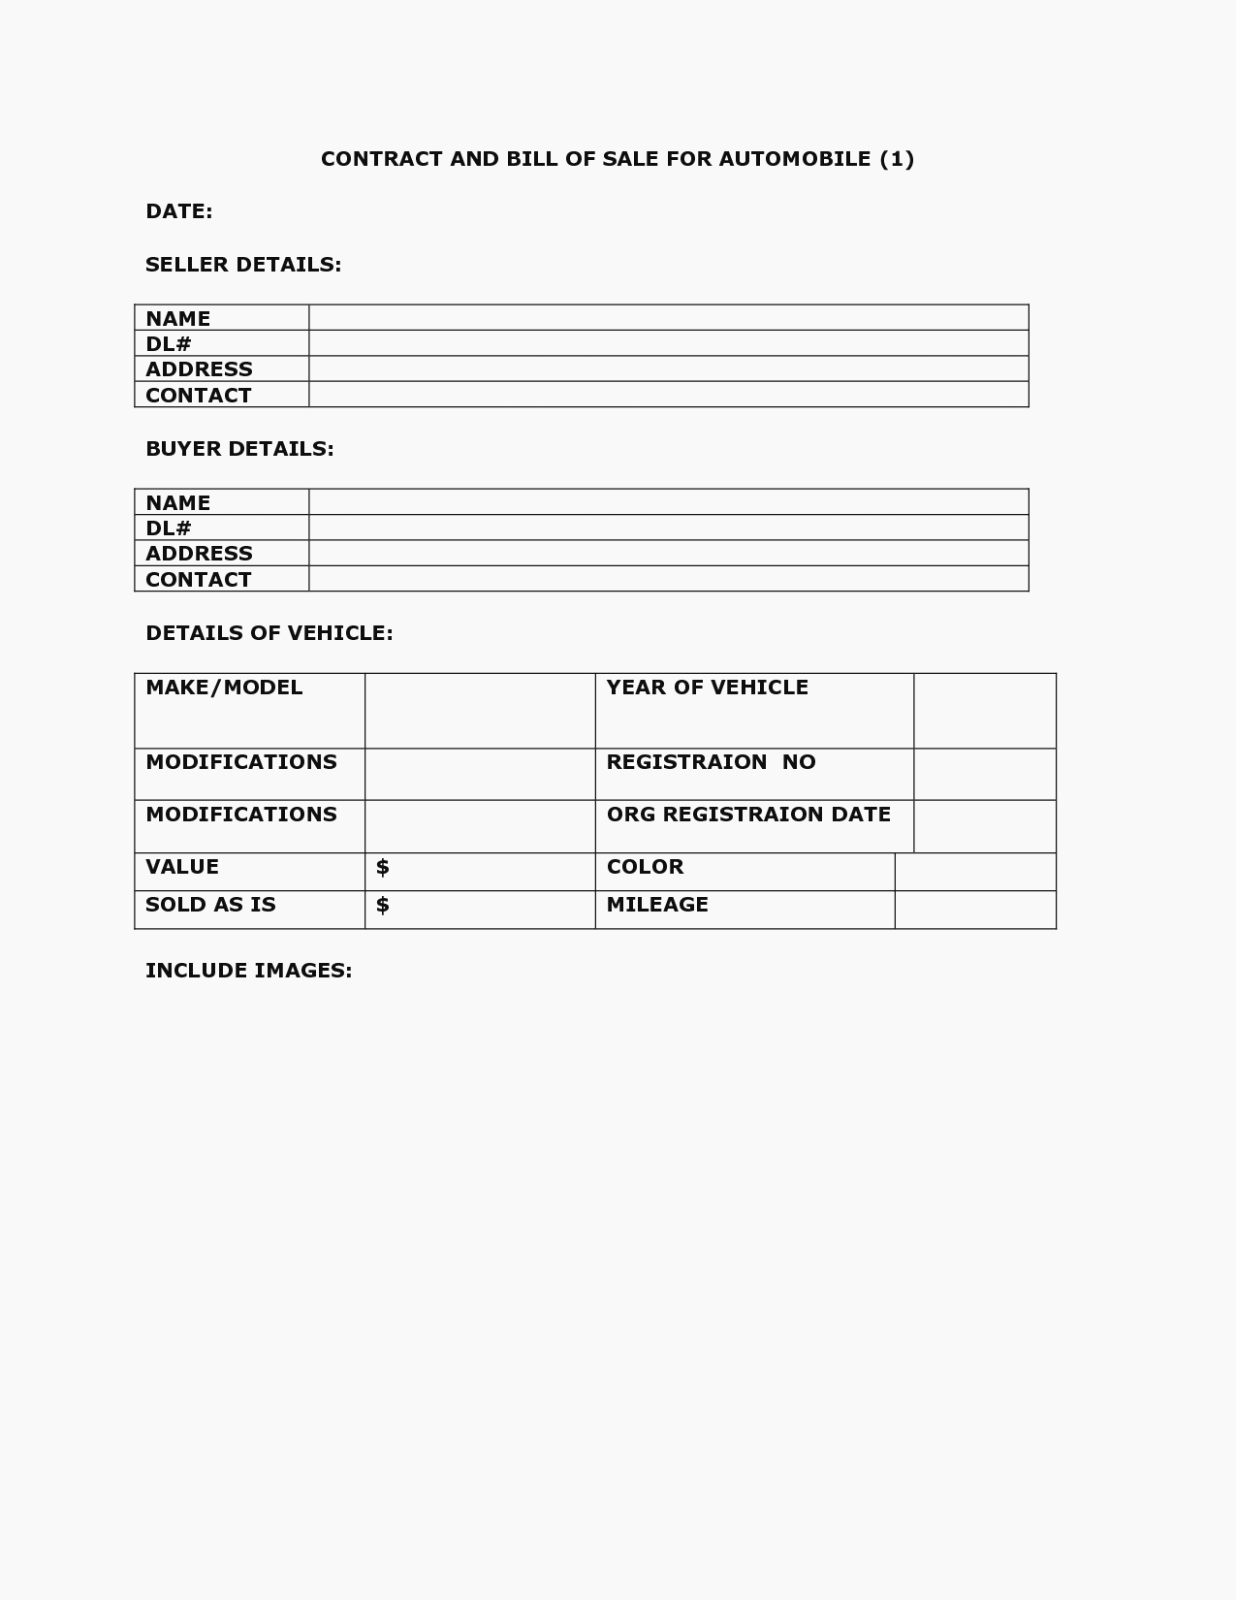 Vehicle Purchase Agreement Template Lovely is Selling Car as is form